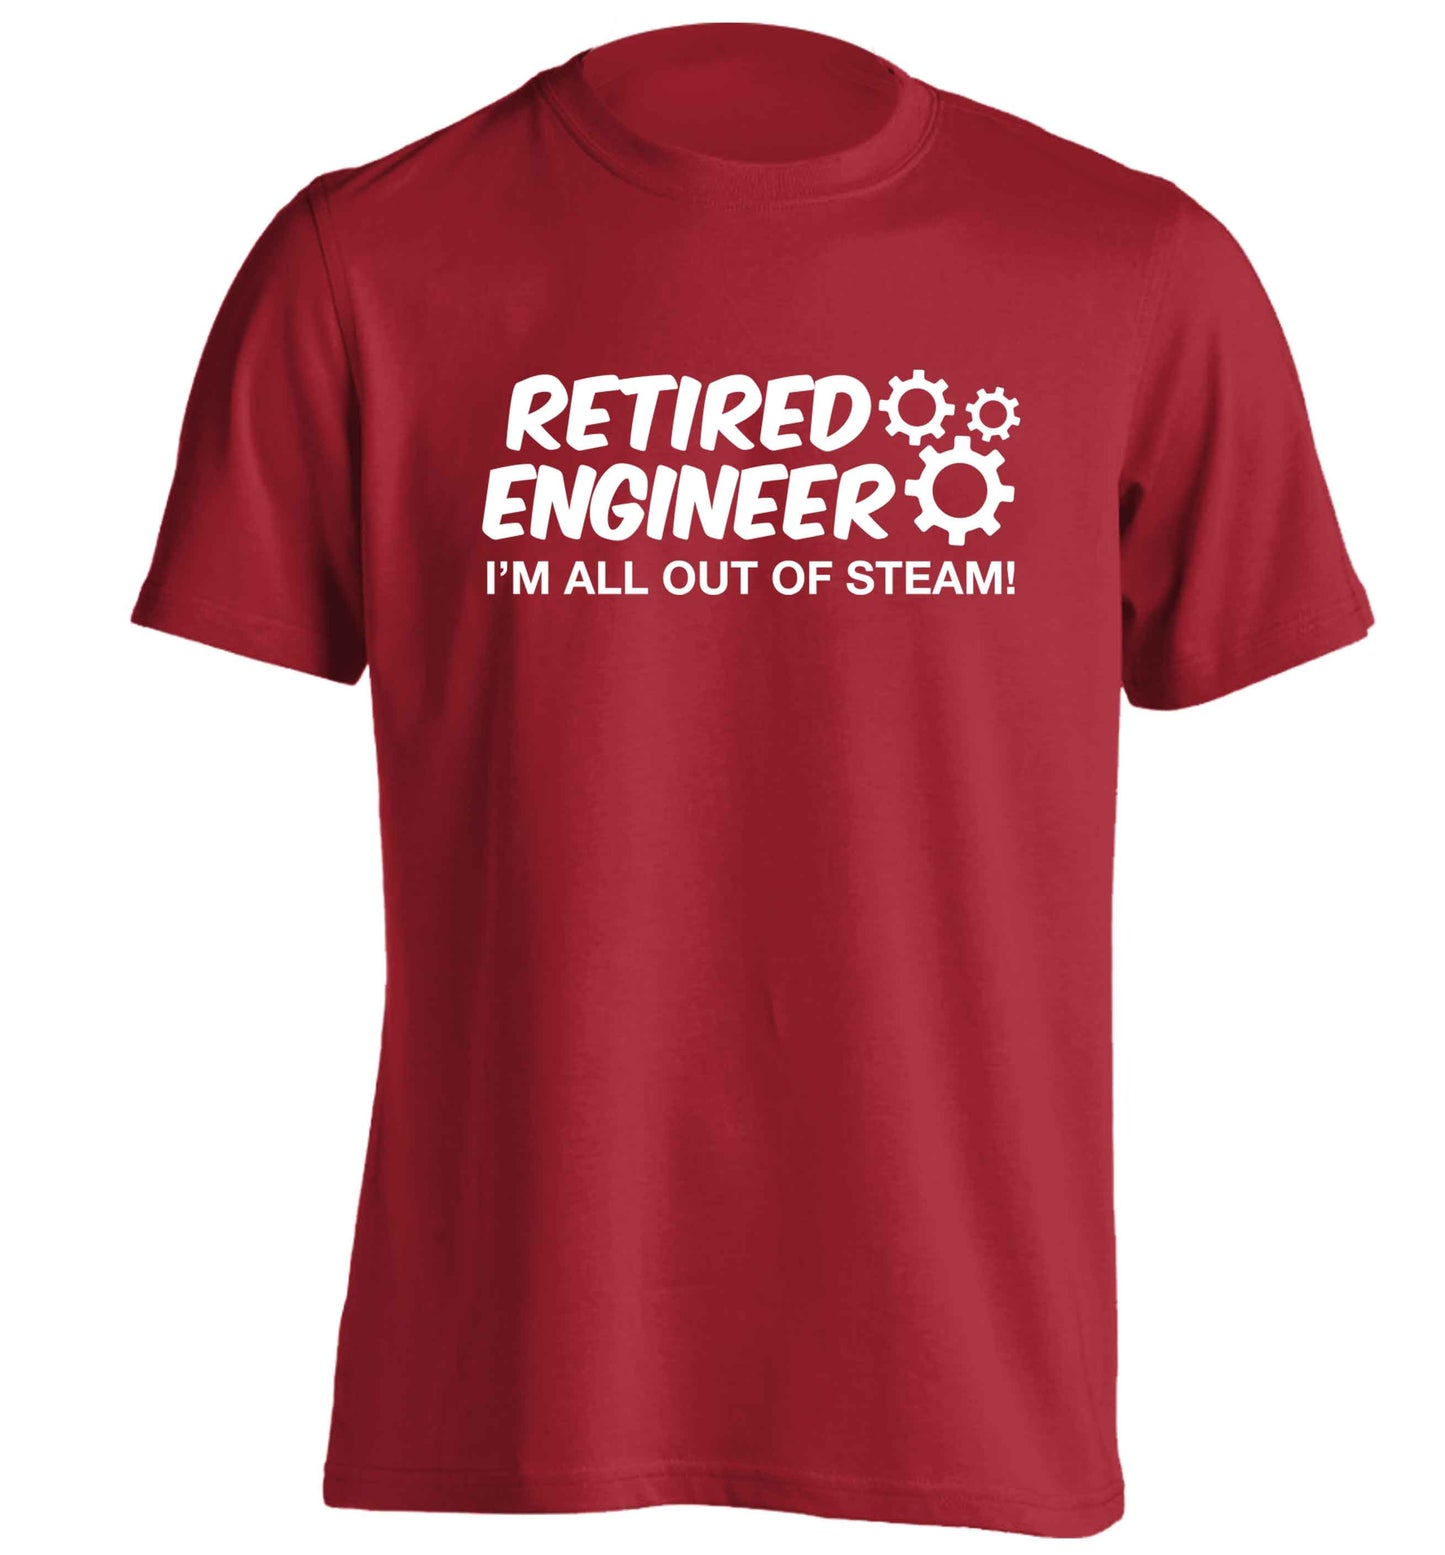 Retired engineer I'm all out of steam adults unisex red Tshirt 2XL